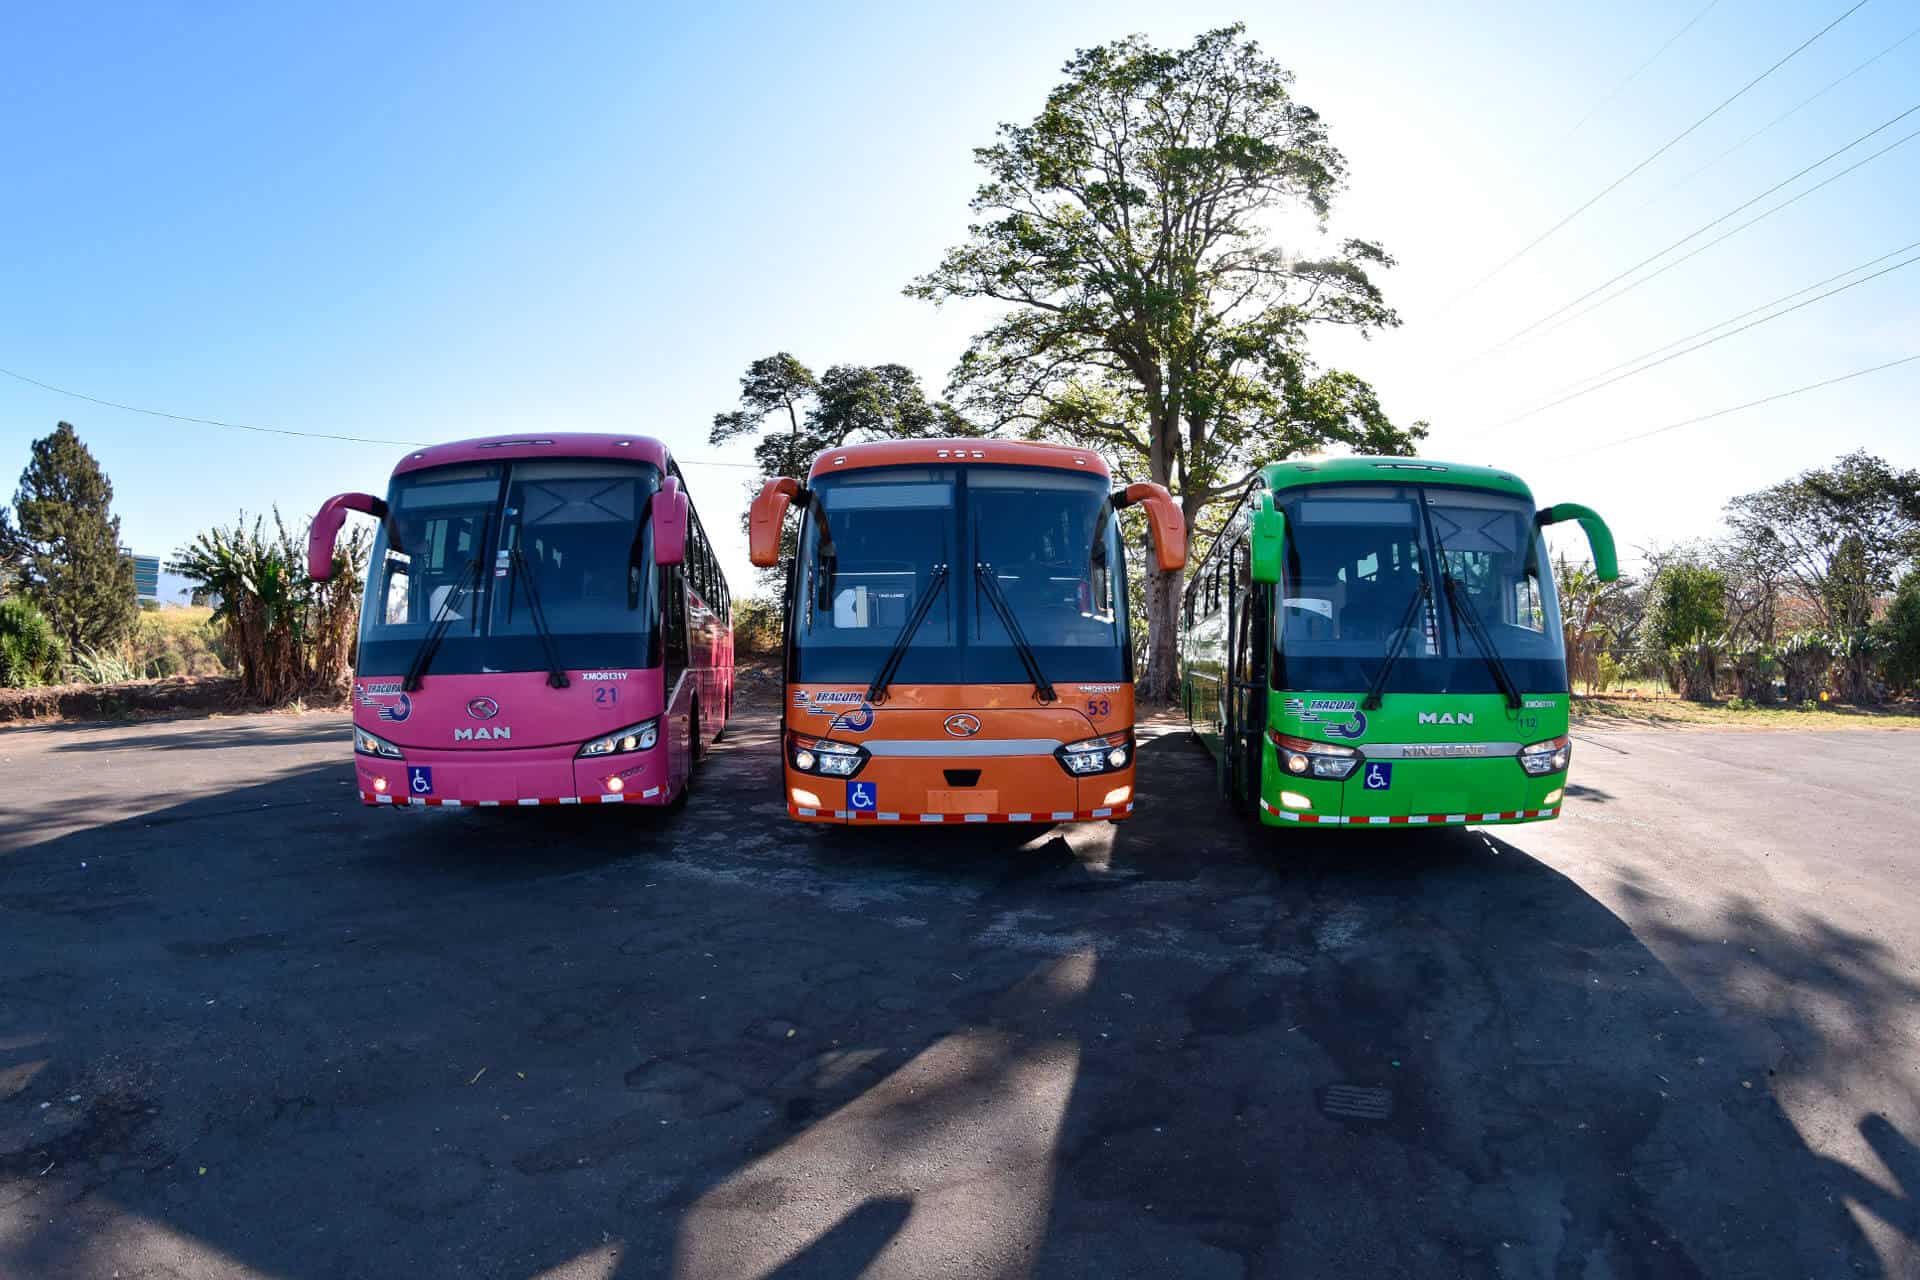 How To Get From Jaco to Sierpe Best Way – All Possible Ways, Jaco to Sierpe, Jaco to Sierpe transfer, cheapest way from Jaco to Sierpe, bus from Jaco to Sierpe, from Jaco to Sierpe by bus, best way from Jaco to Sierpe, taxi from Jaco to Sierpe, private transfer from Jaco to Sierpe, Shared Van from Jaco to Sierpe, rent a car in Jaco, uber from Jaco to Sierpe